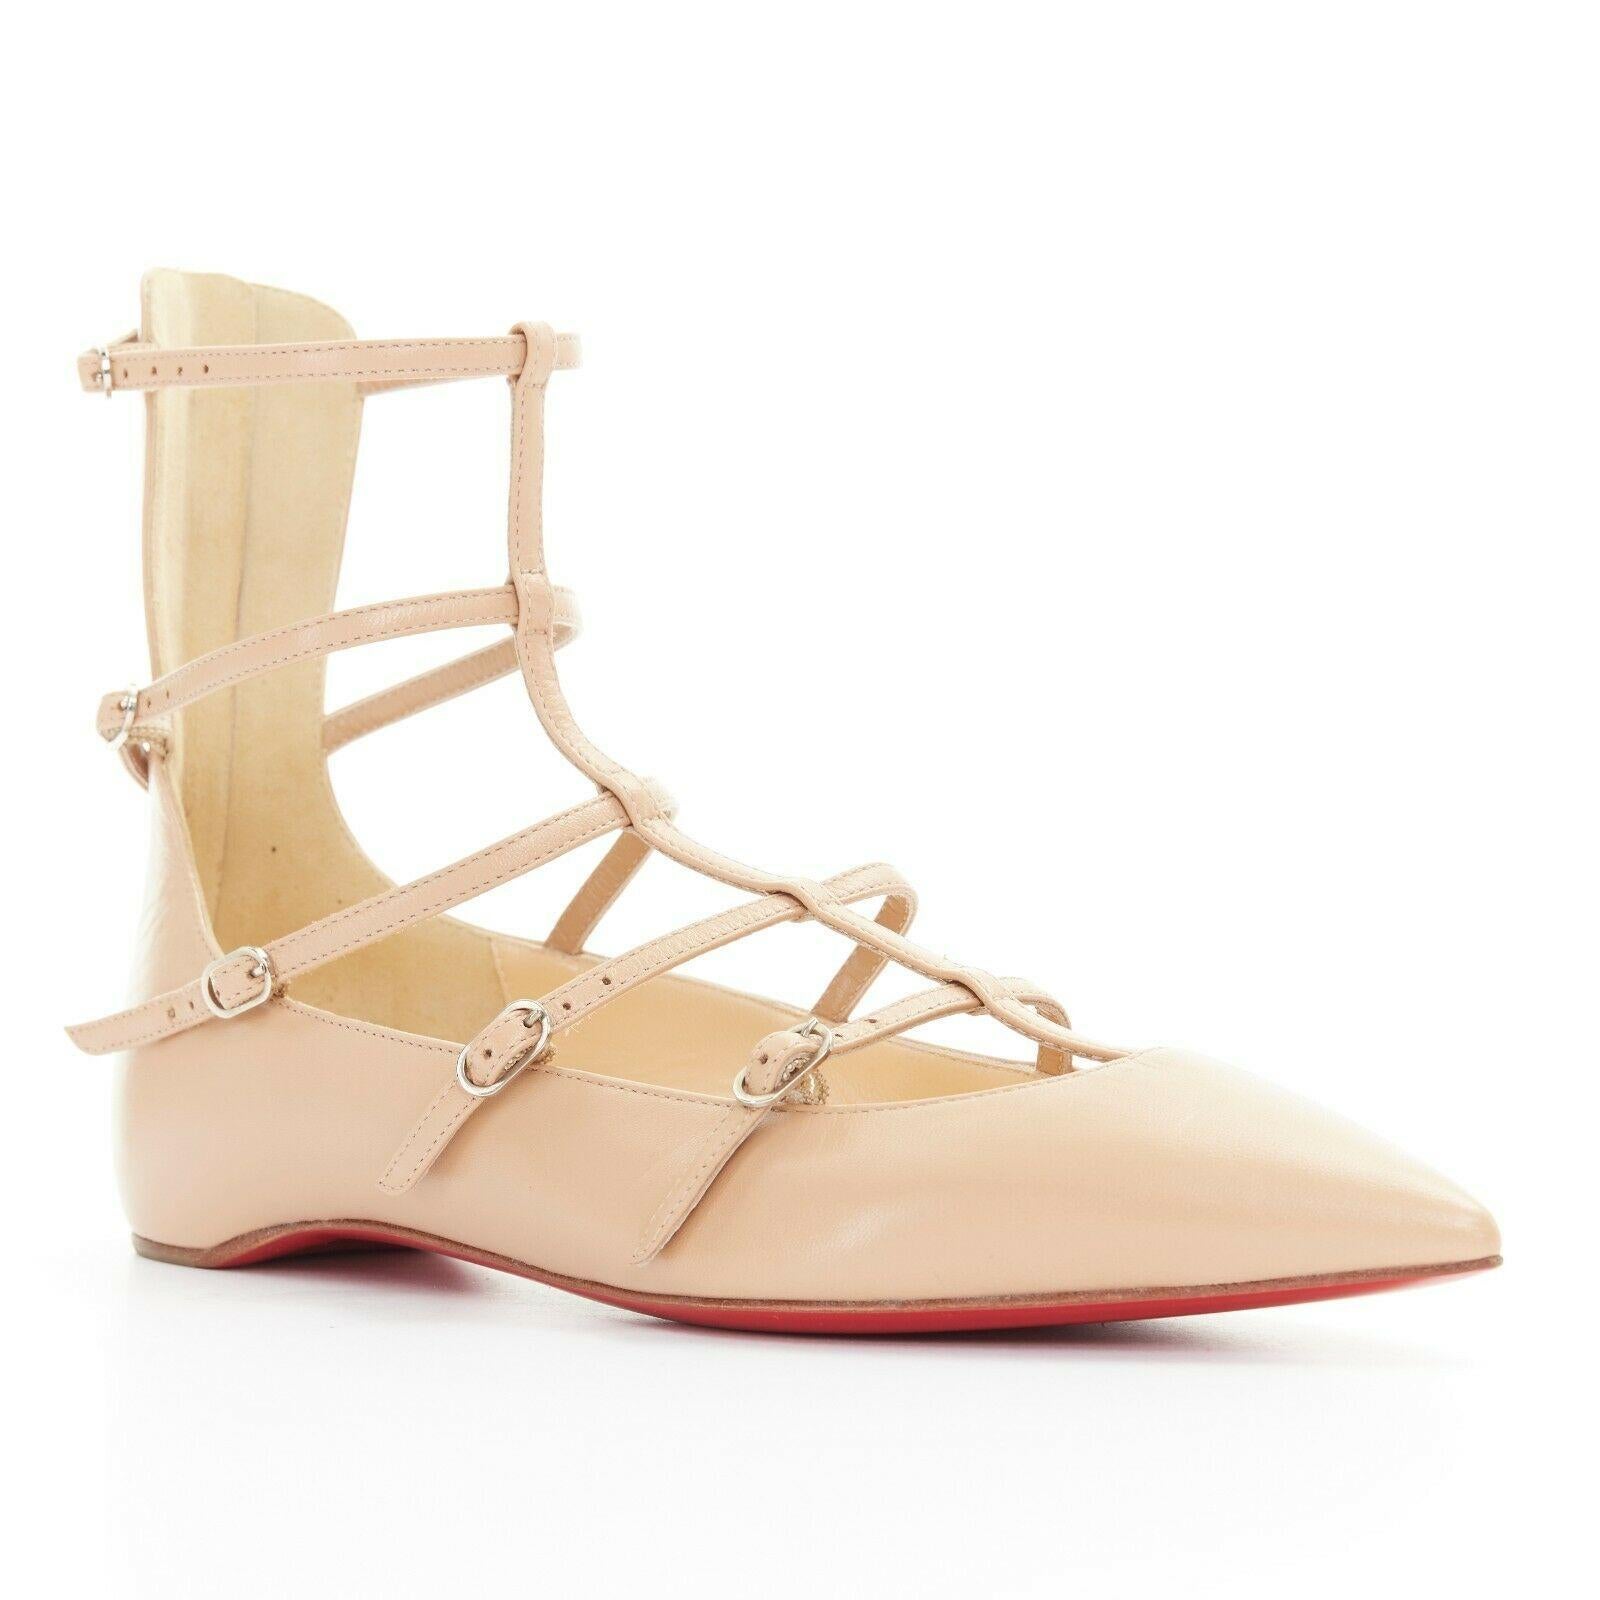 new CHRISTIAN LOUBOUTIN Toerless Muse nude point toe gladiator caged flats EU35
CHRISTIAN LOUBOUTIN
Toerless Muse. 
Nude leather upper. 
Pointed toe. 
Strappy gladiator upper. 
Gold-tone hardware. 
Buckle closure. 
Zip back closure. 
Ankle length.